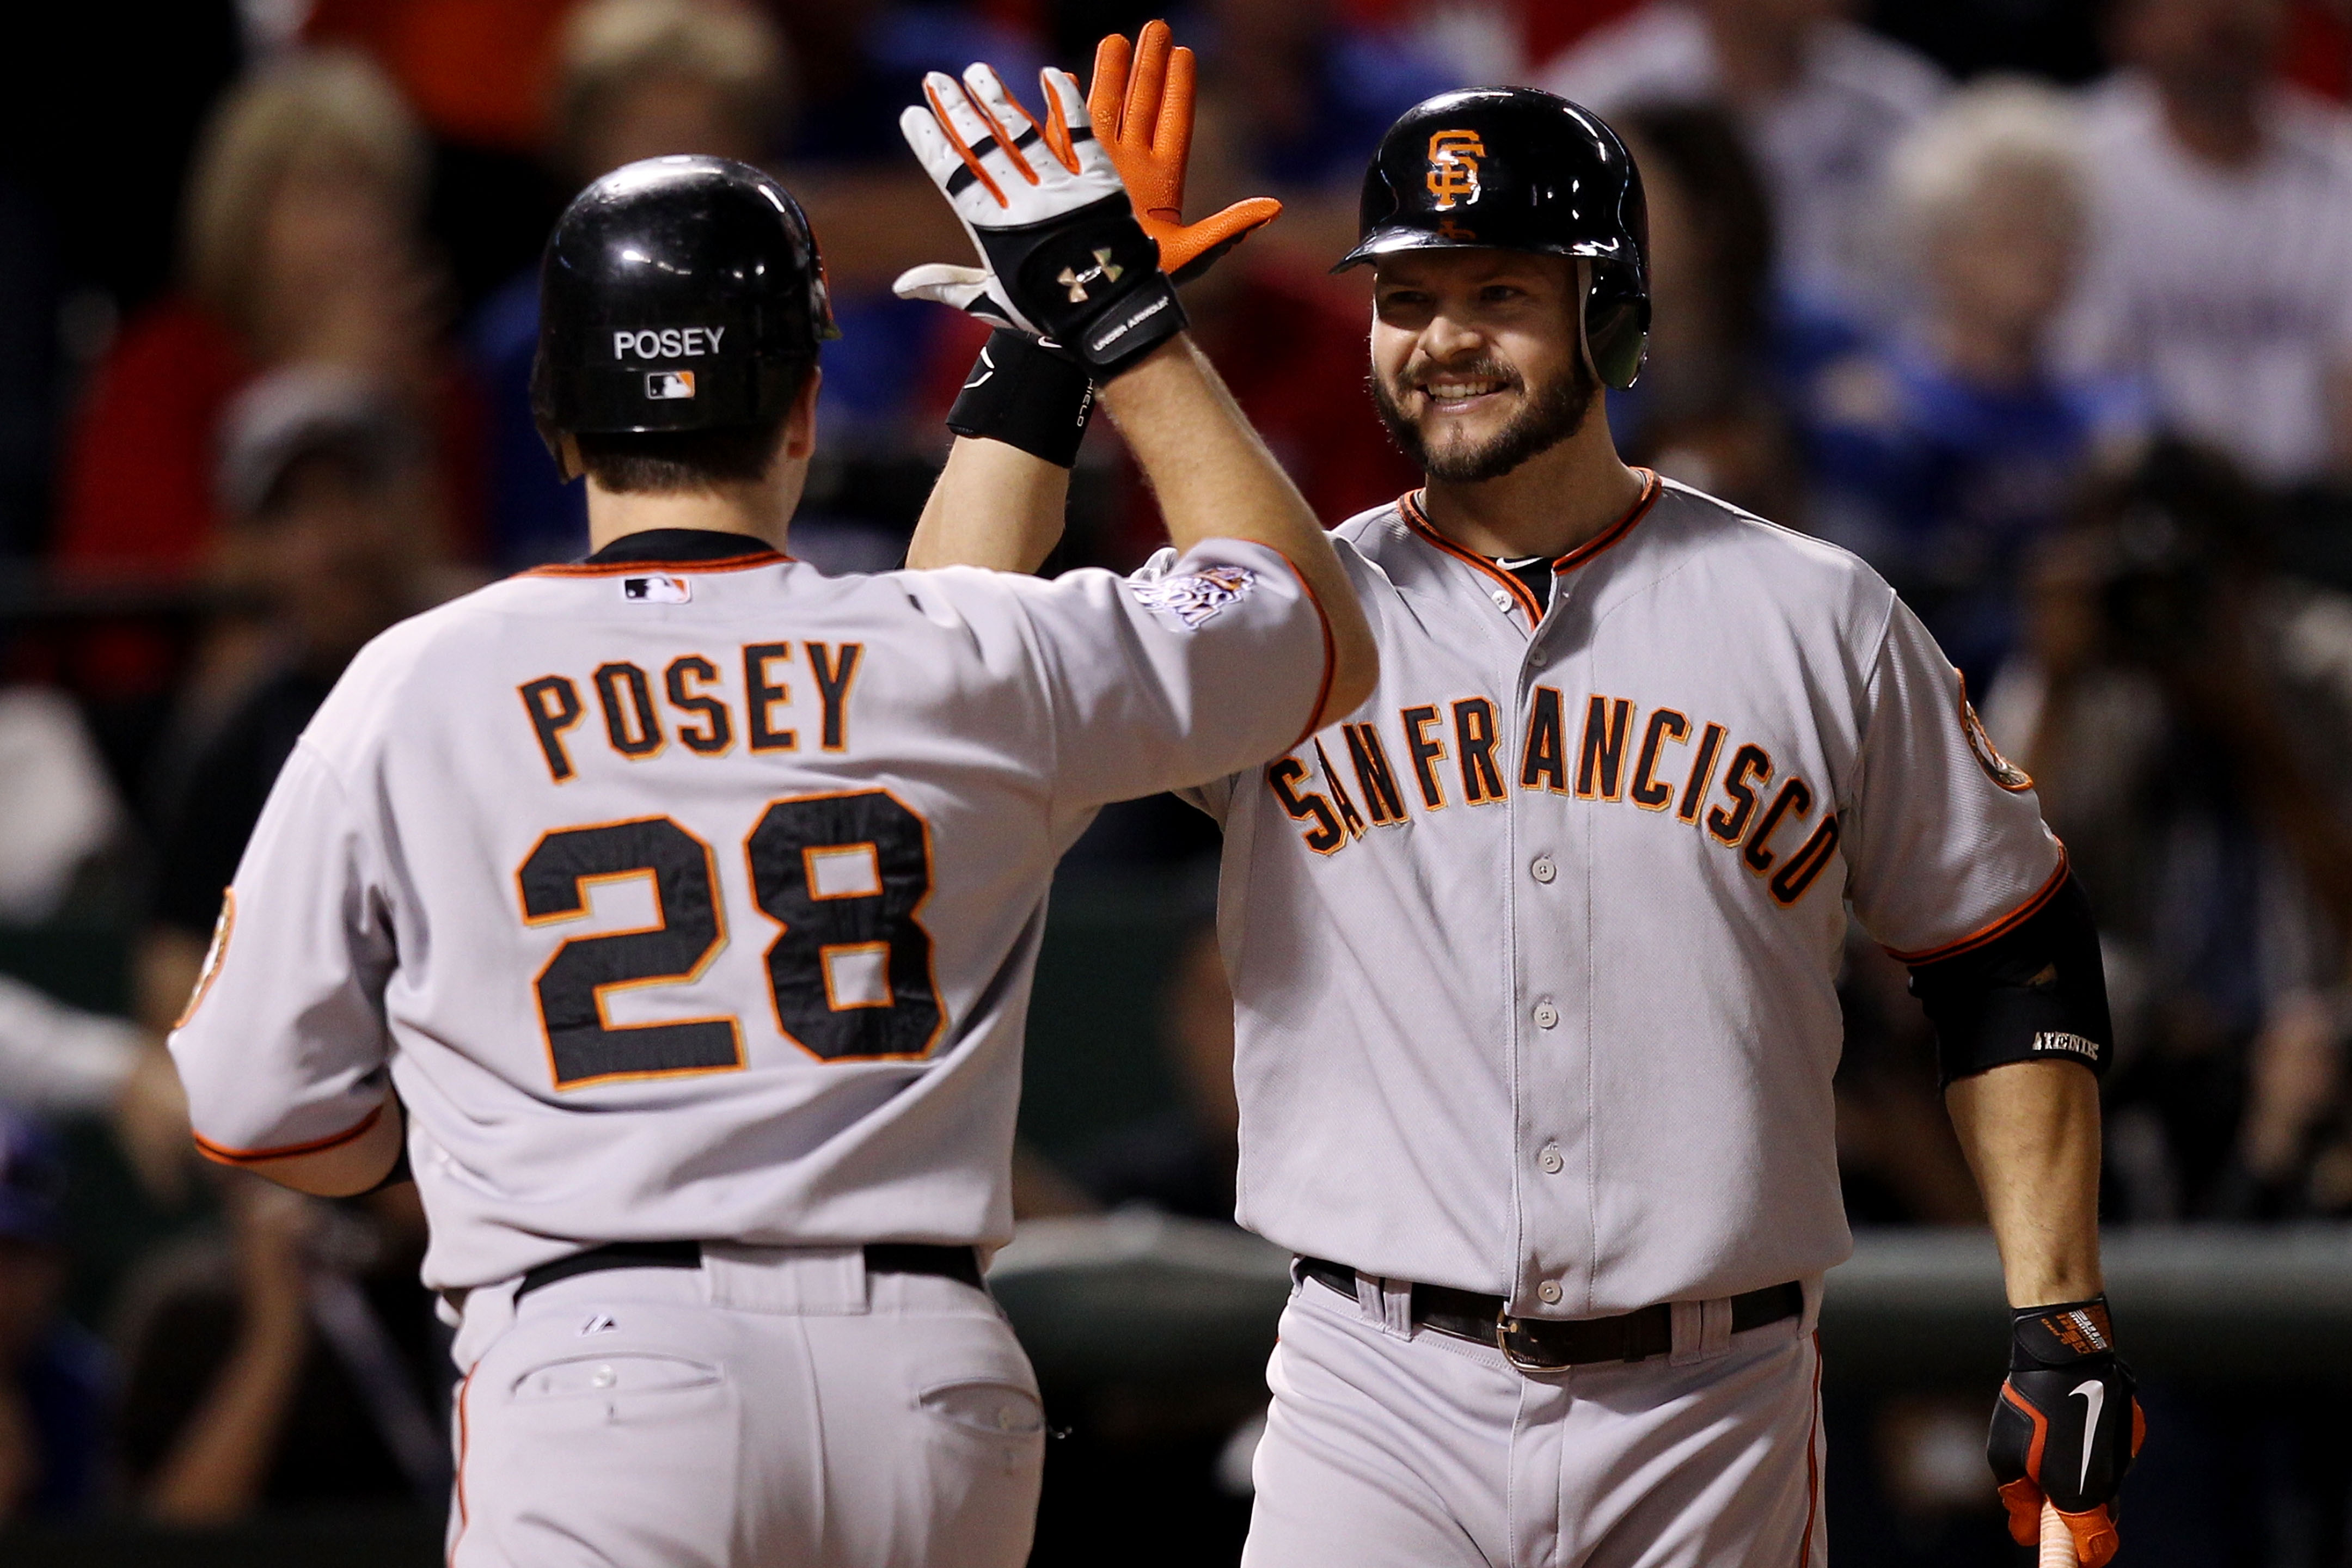 World Series 2010: Matt Cain, Buster Posey and 10 Picks for Series